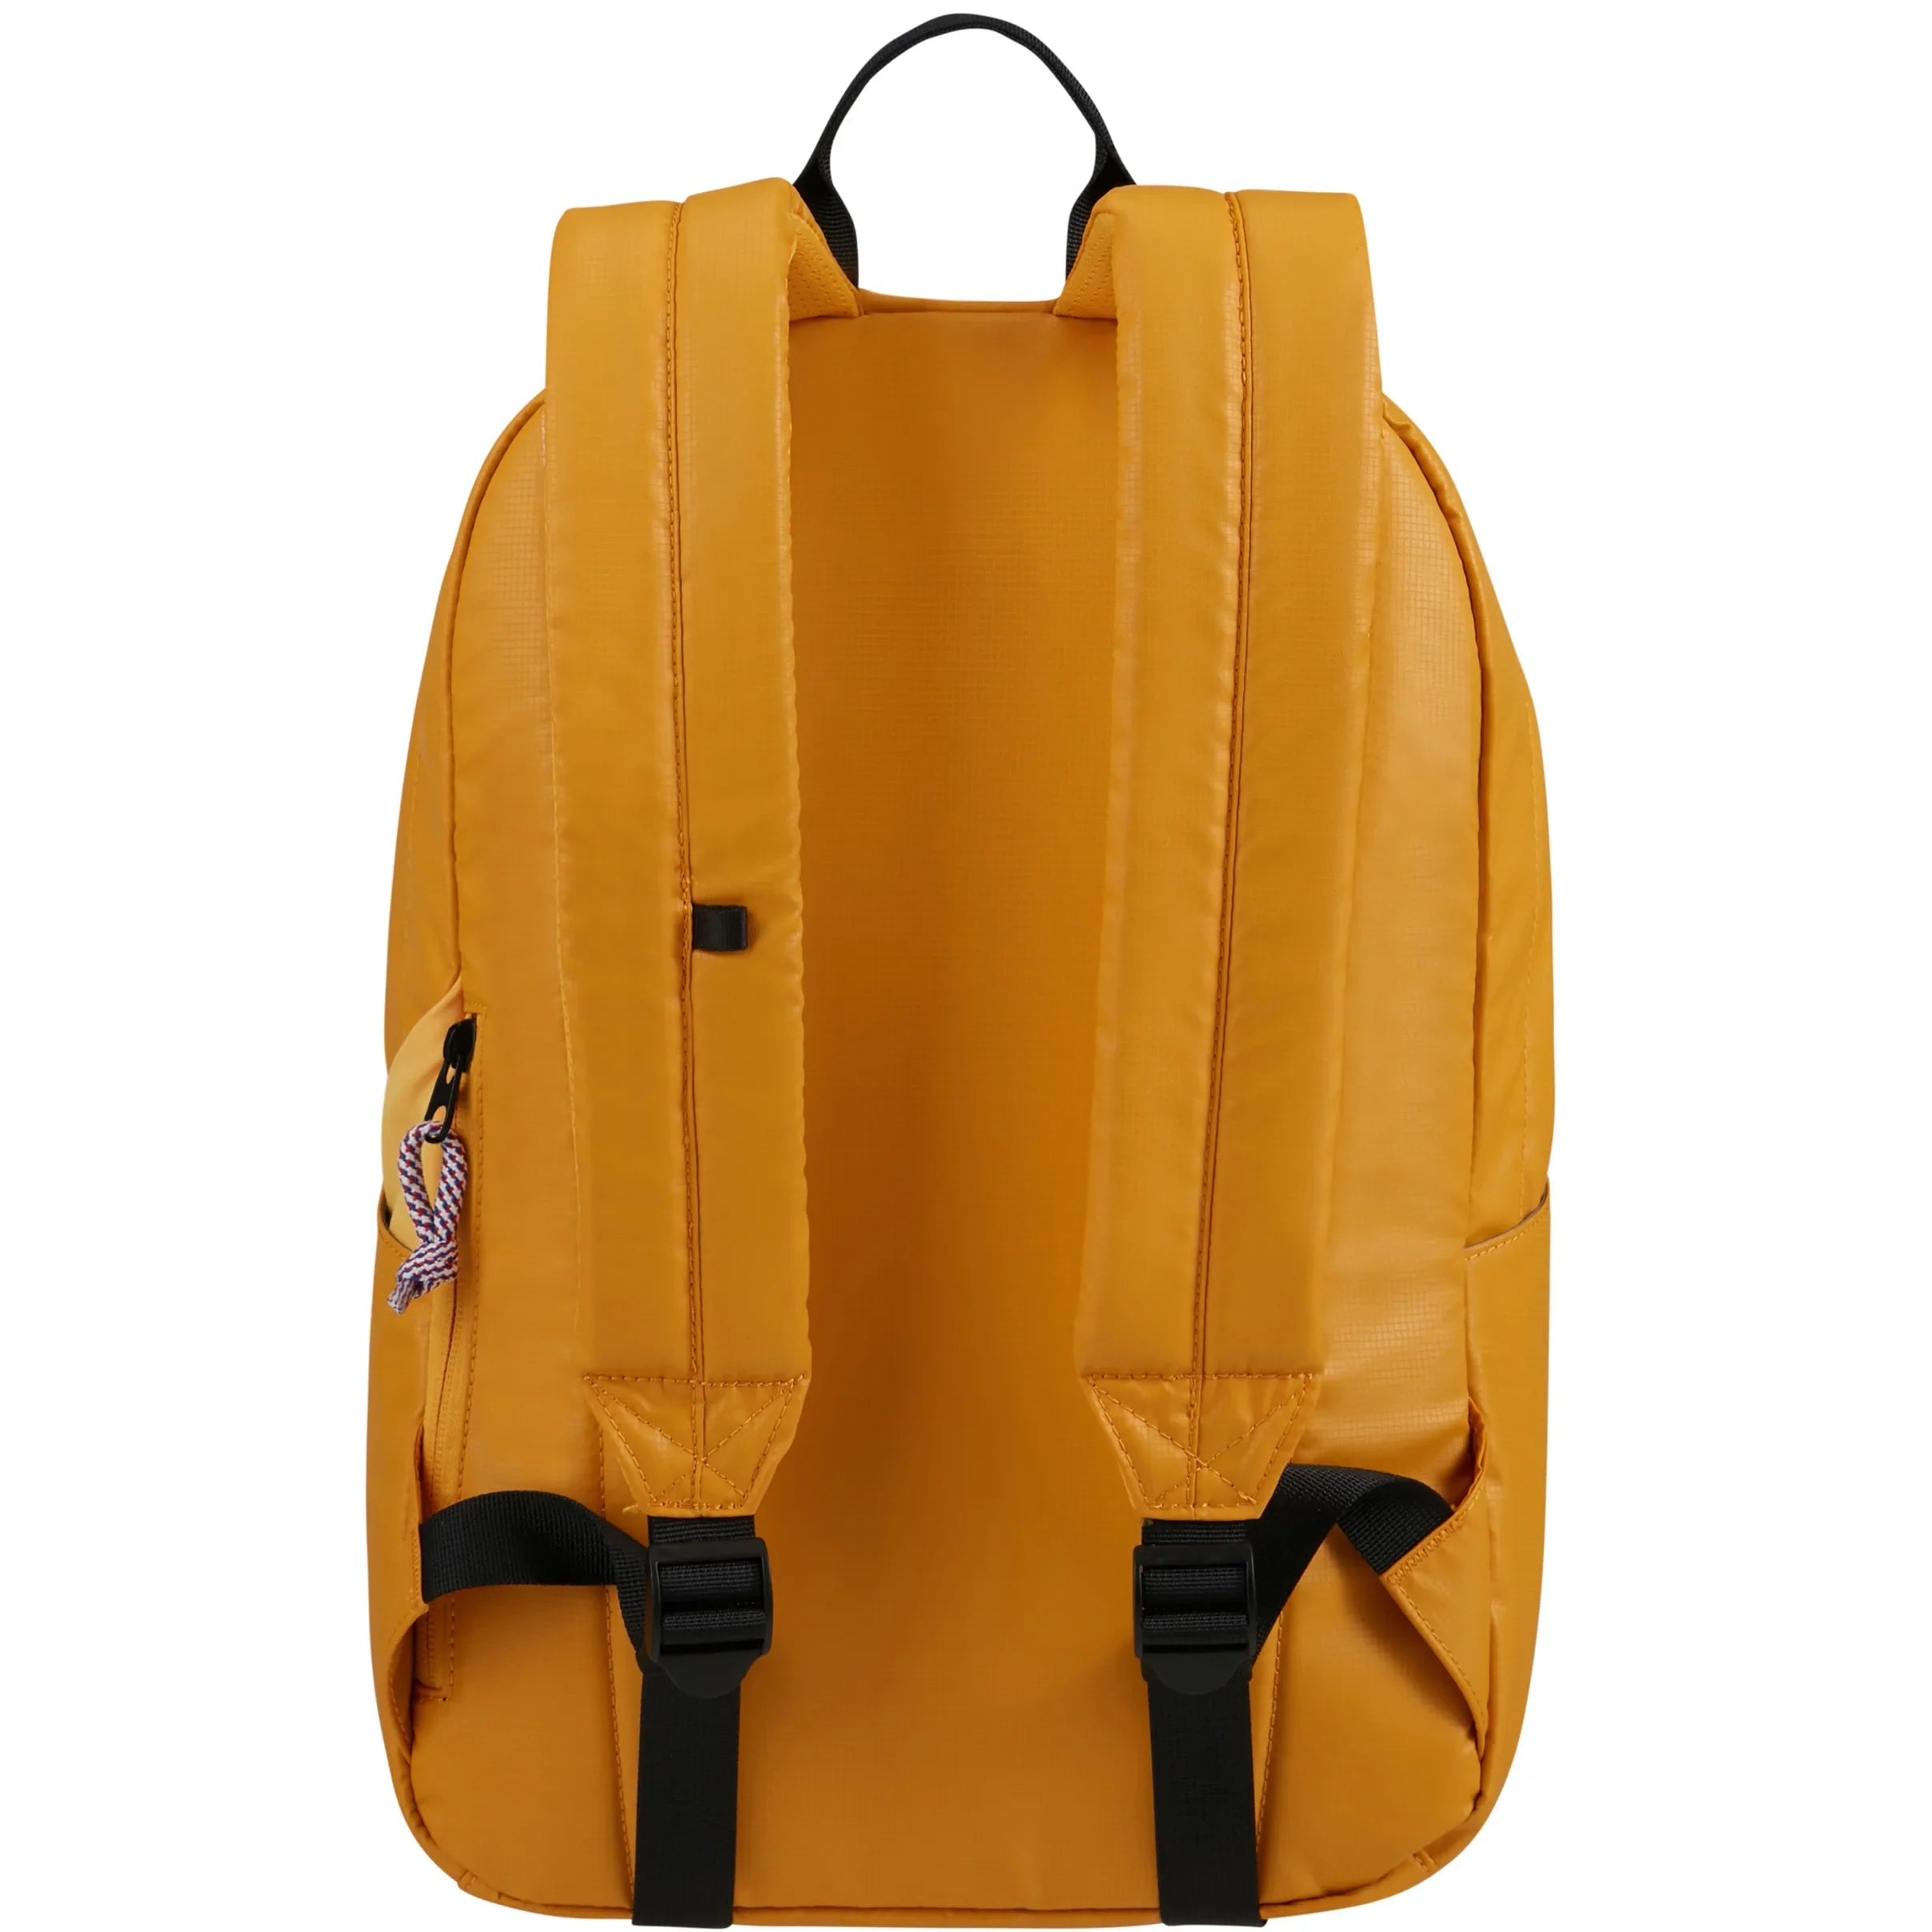 American Tourister Upbeat Pro coated backpack 43 cm - Yellow